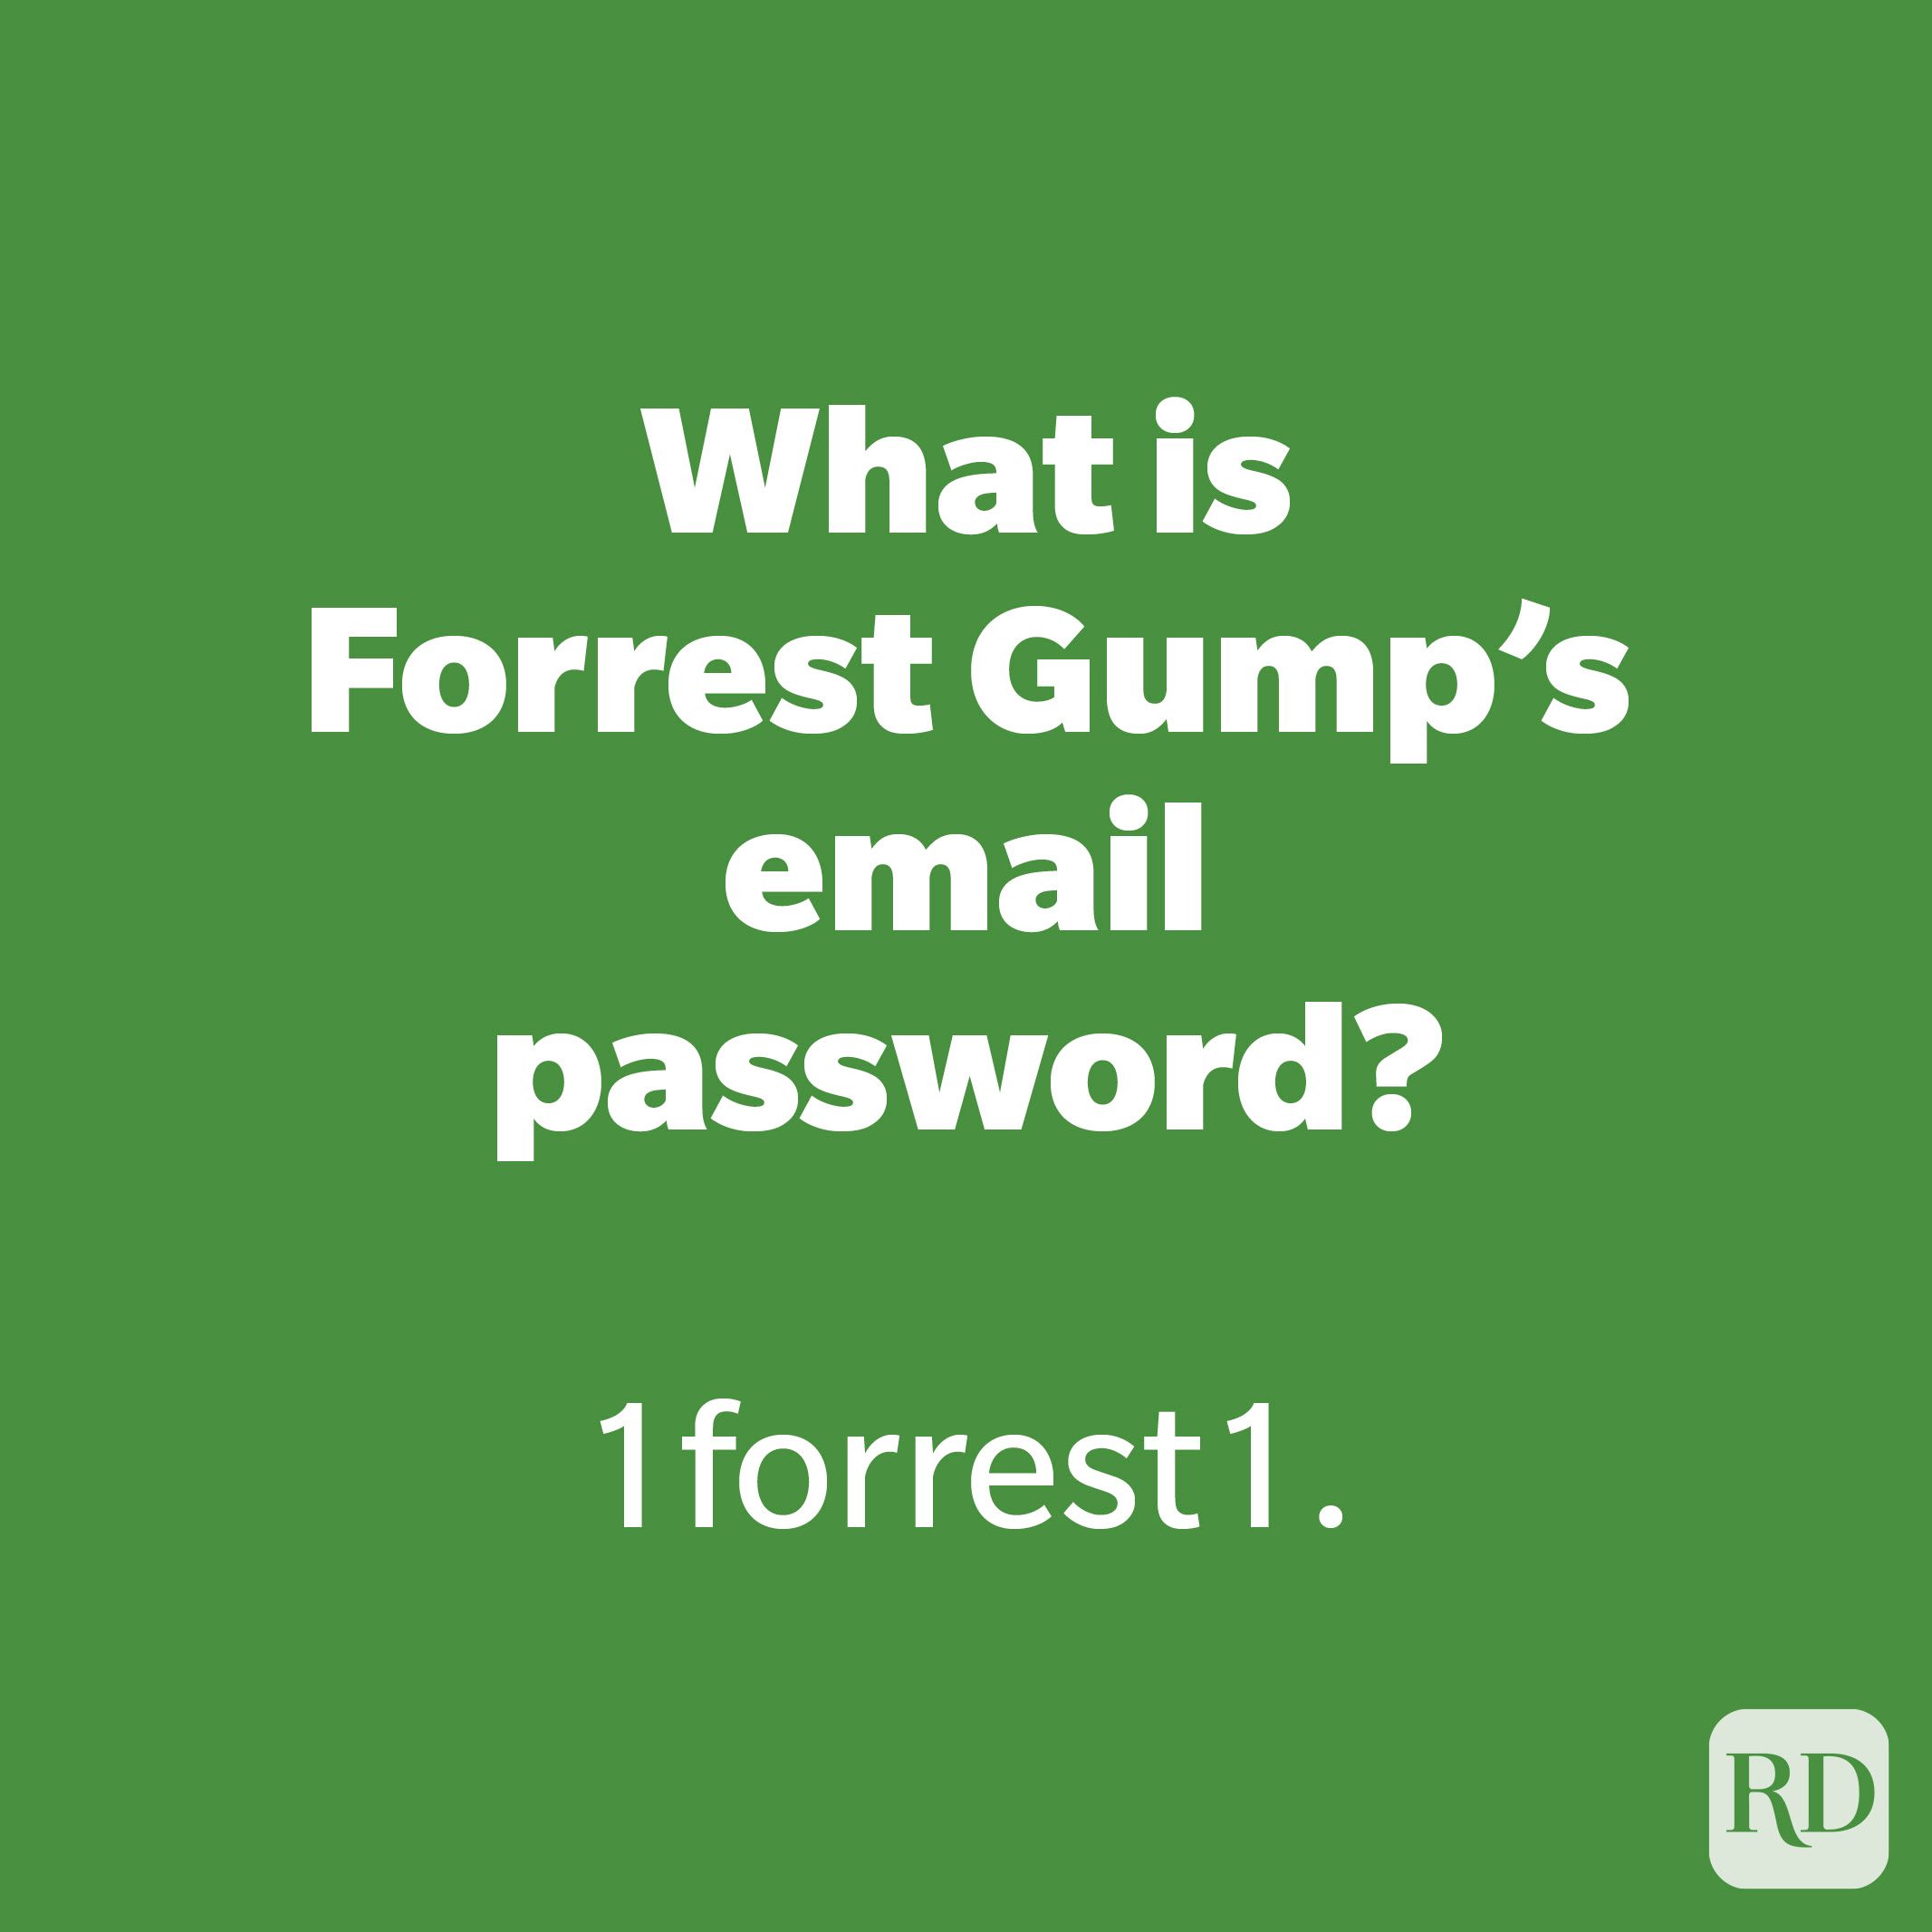 What is Forrest Gump's email password?